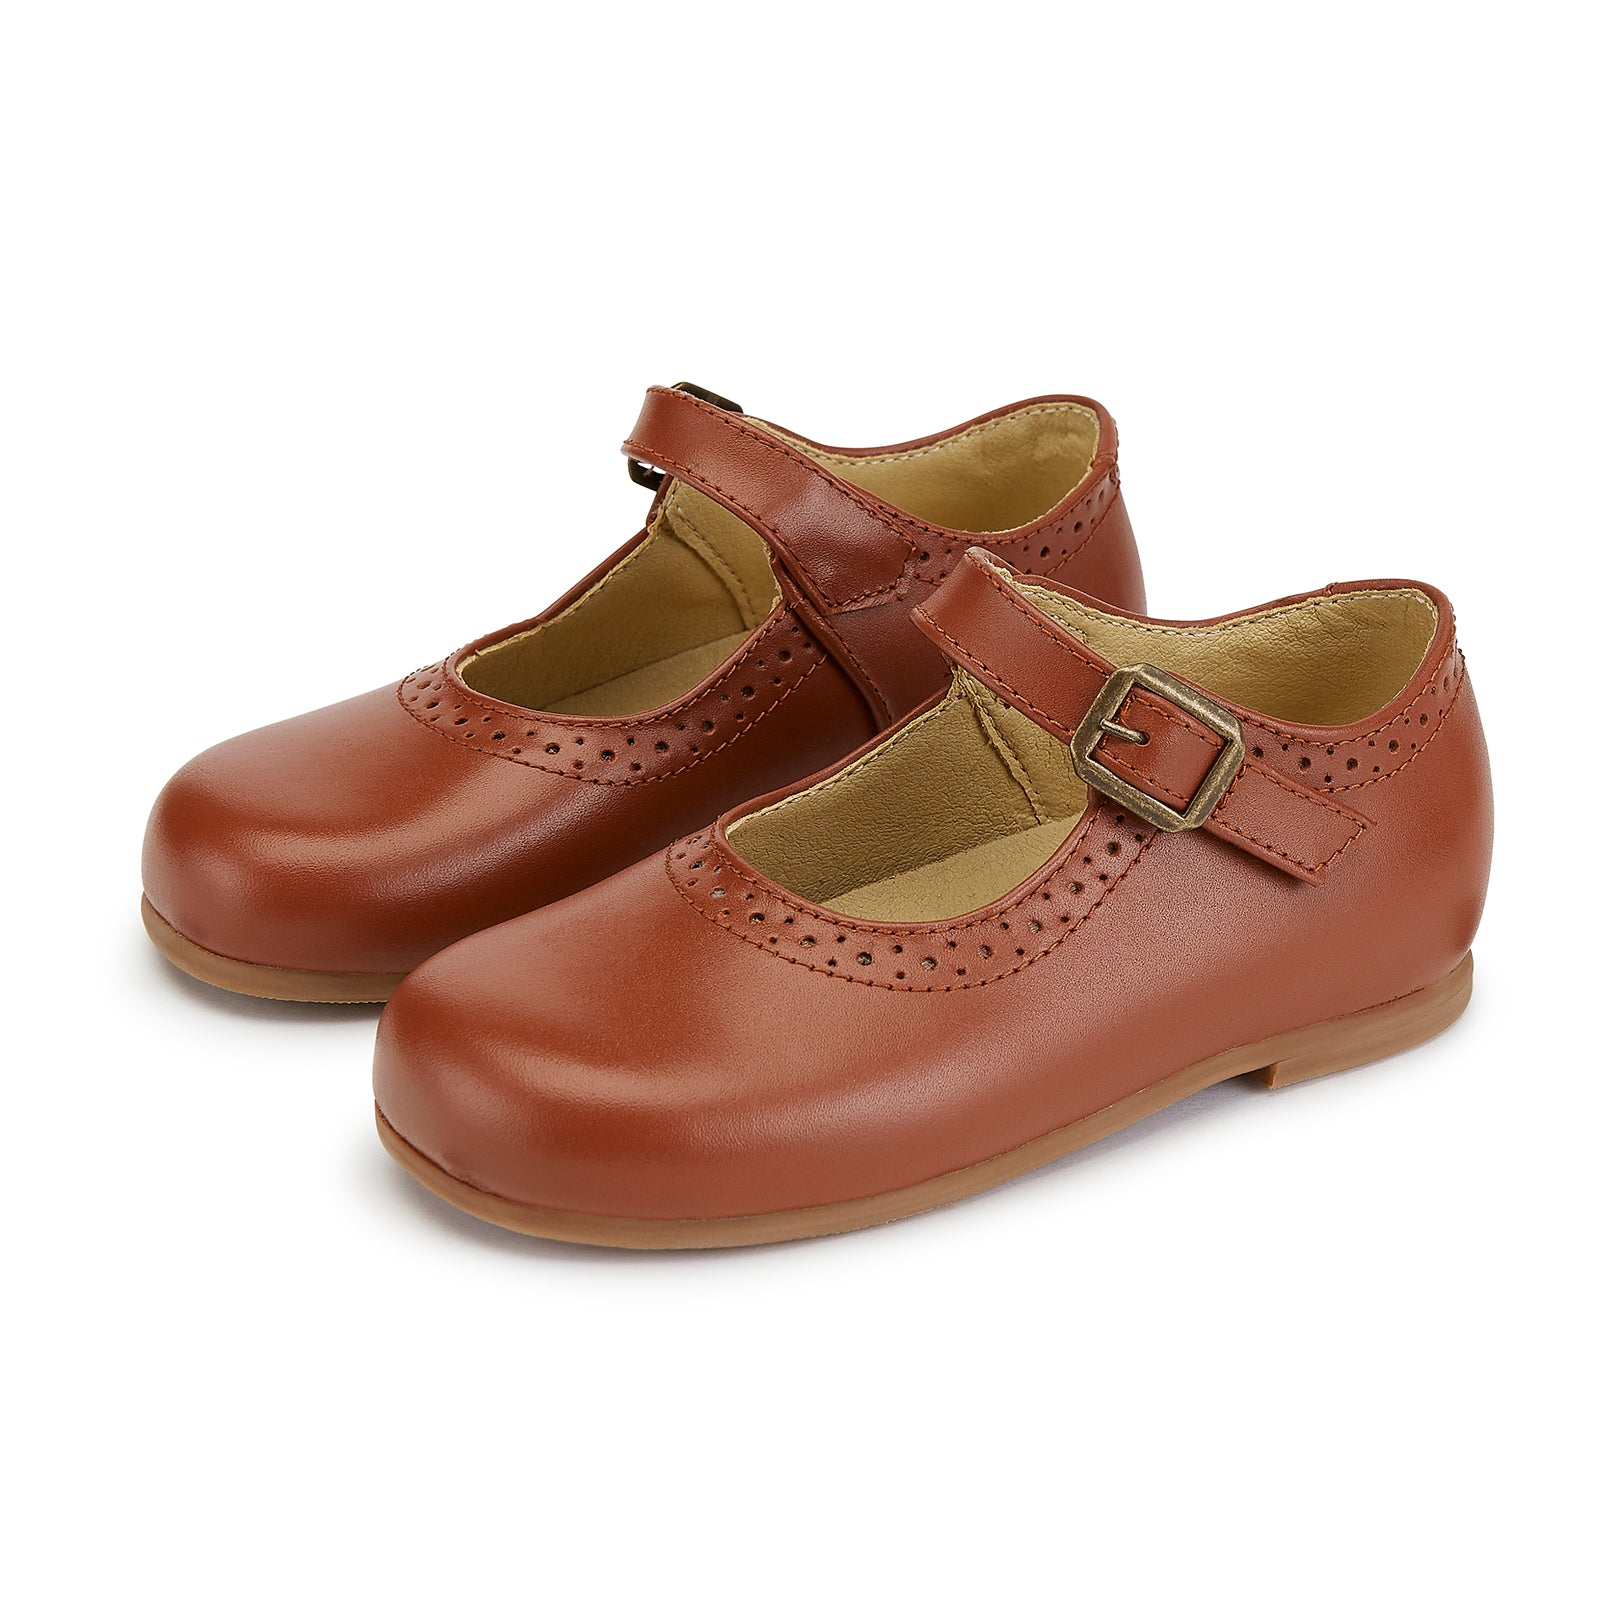 Young Soles Diana Cognac Mary Jane Leather Shoes